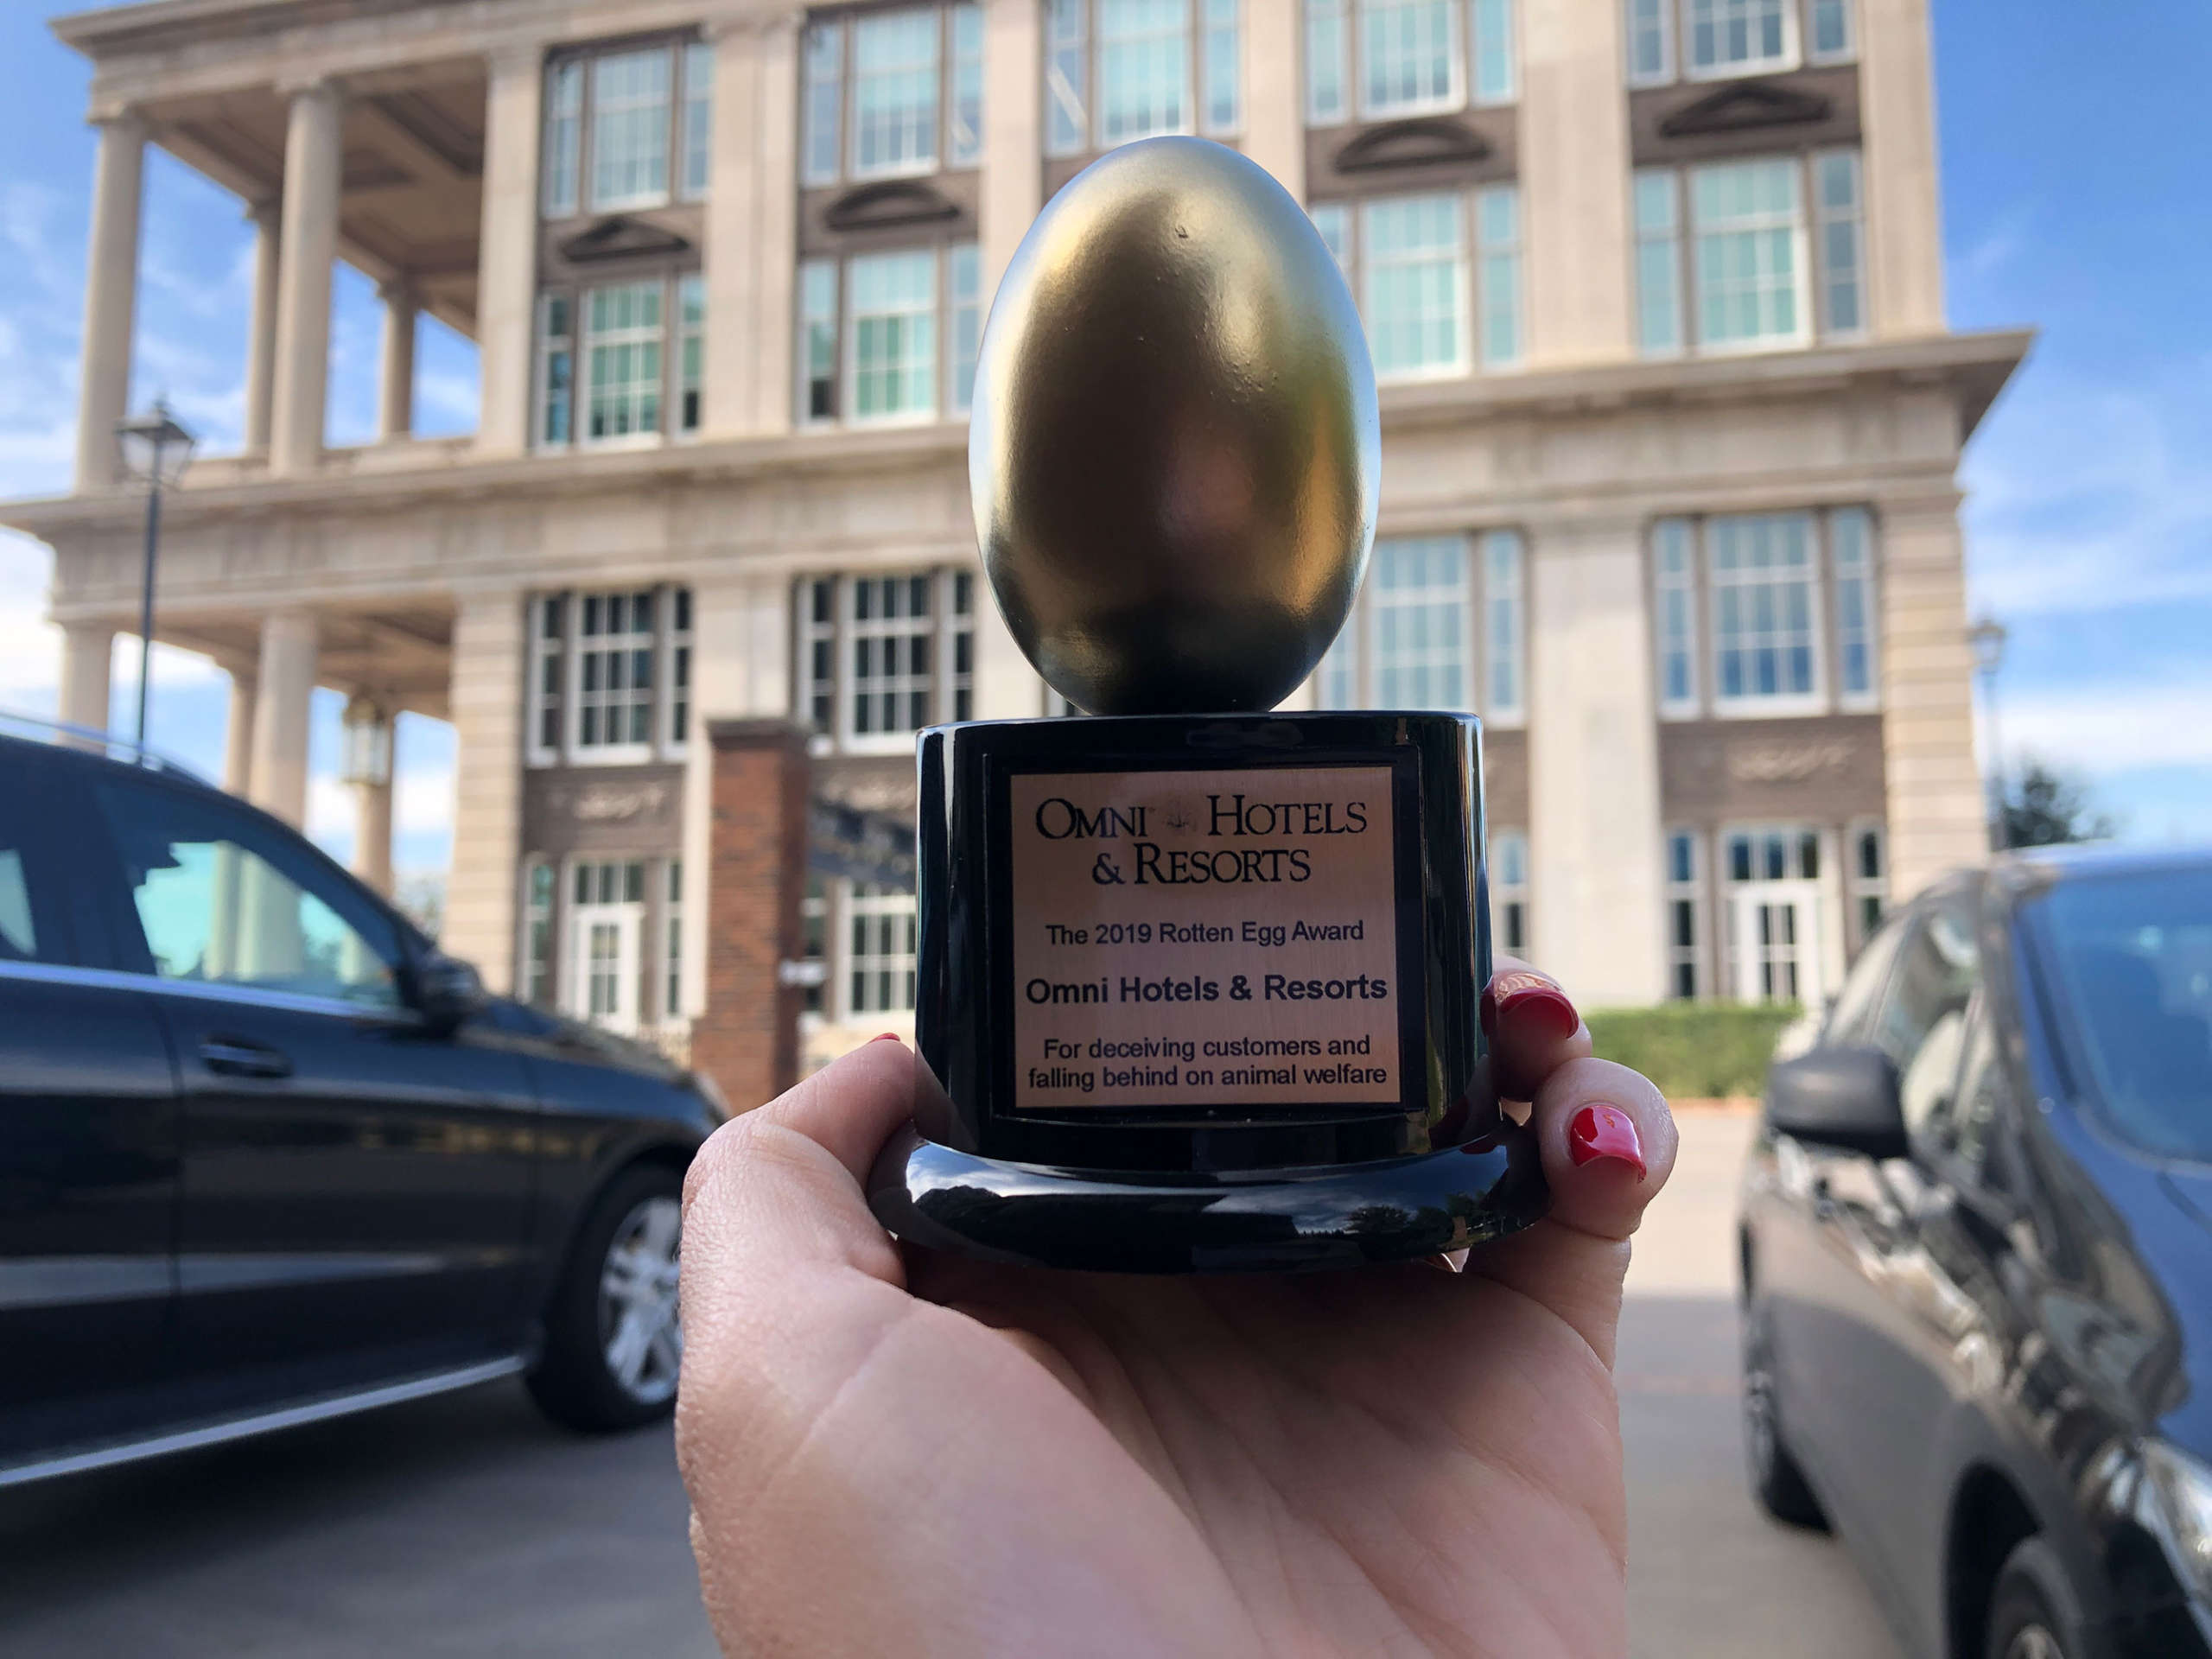 Animal advocates deliver a Rotten Egg Award to the Omni Hotels & Resorts headquarters in Dallas, TX. The award is for deceiving customers and falling behind on animal welfare.